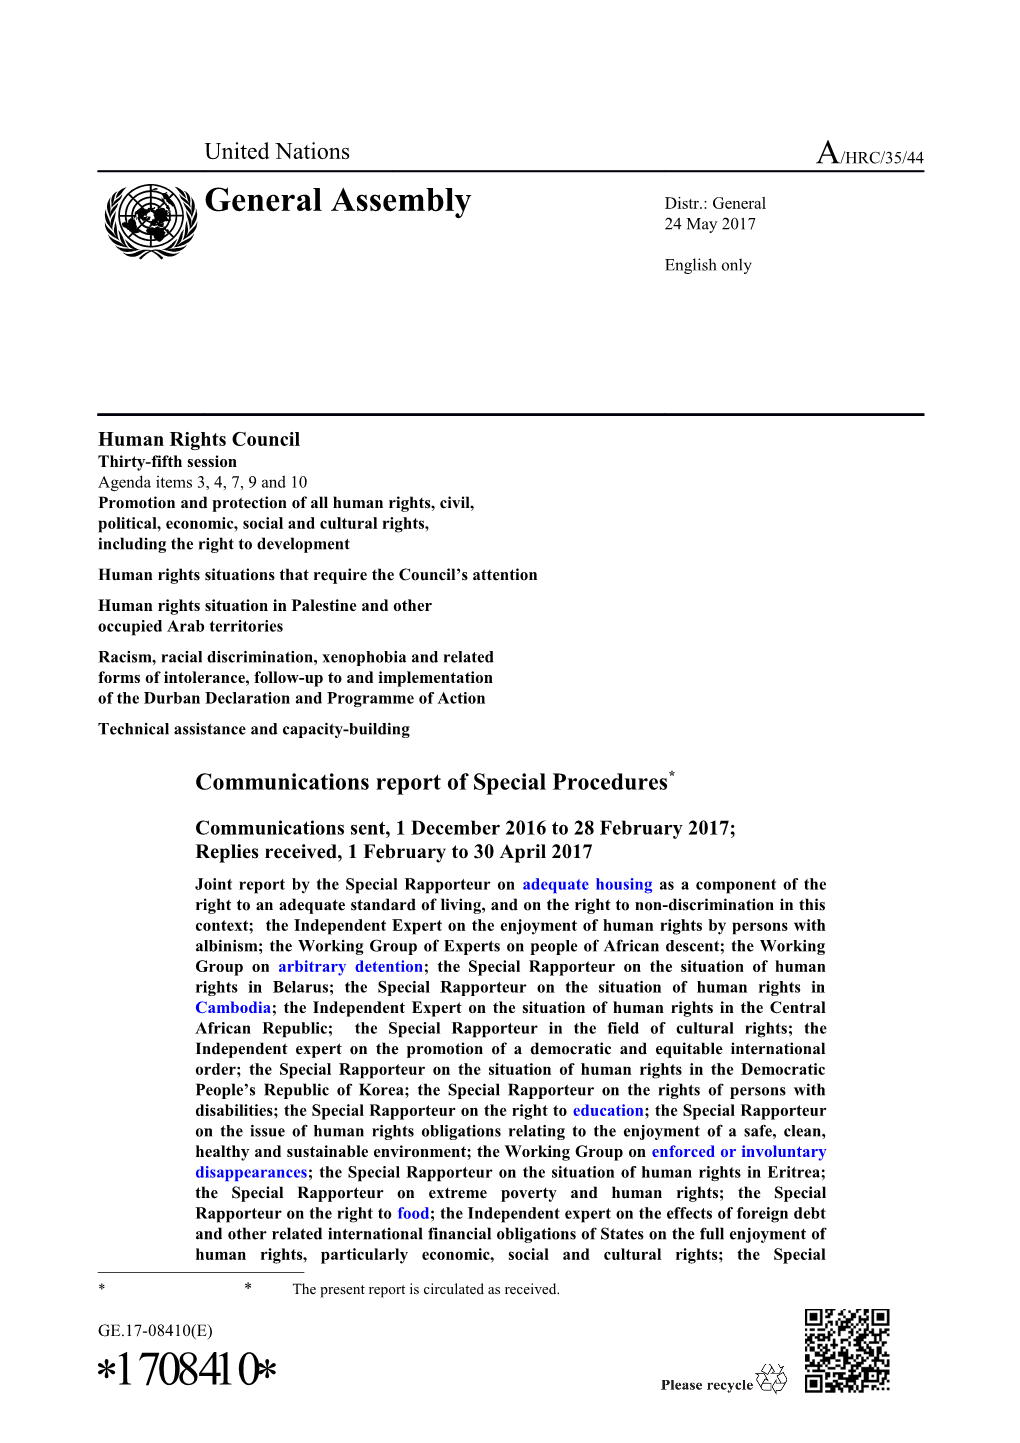 Communications Report of Special Procedures in English